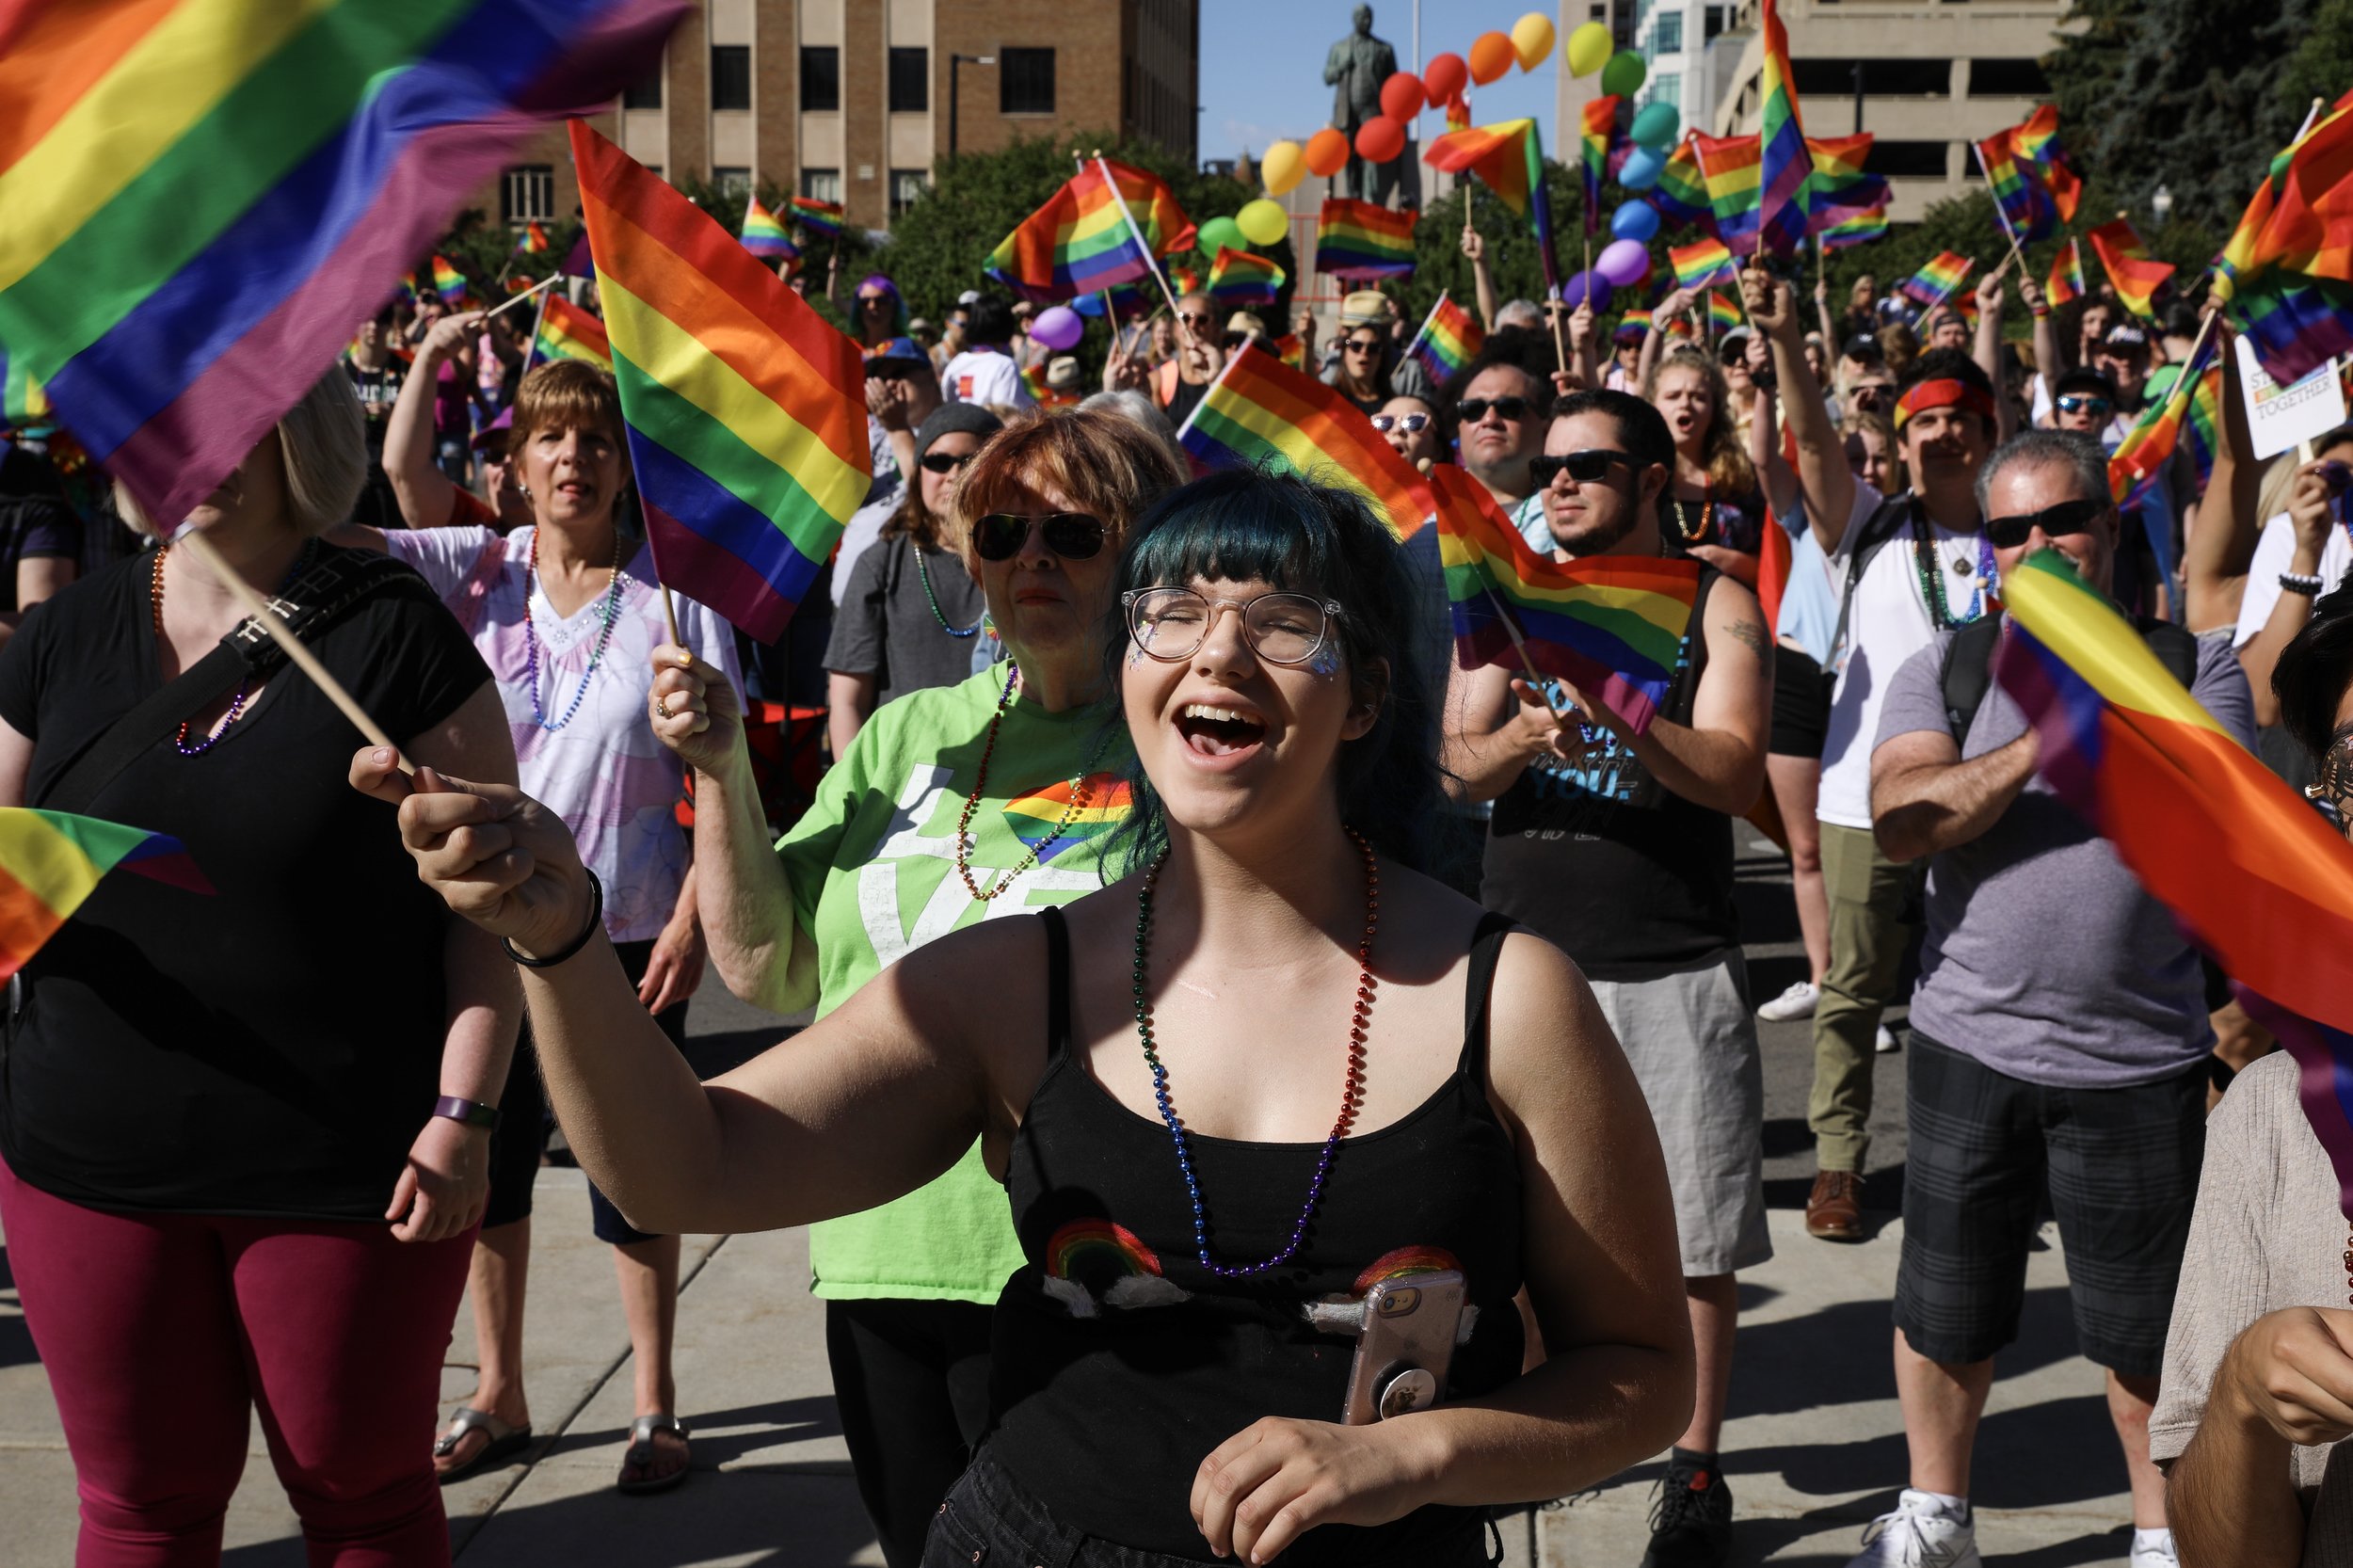  Emily Talbot, center, waves a rainbow flag to support a speaker during a rally at 2018 Boise Pride Festival in downtown Boise on Saturday, June 16, 2018. Talbot identifies herself as bisexual. 